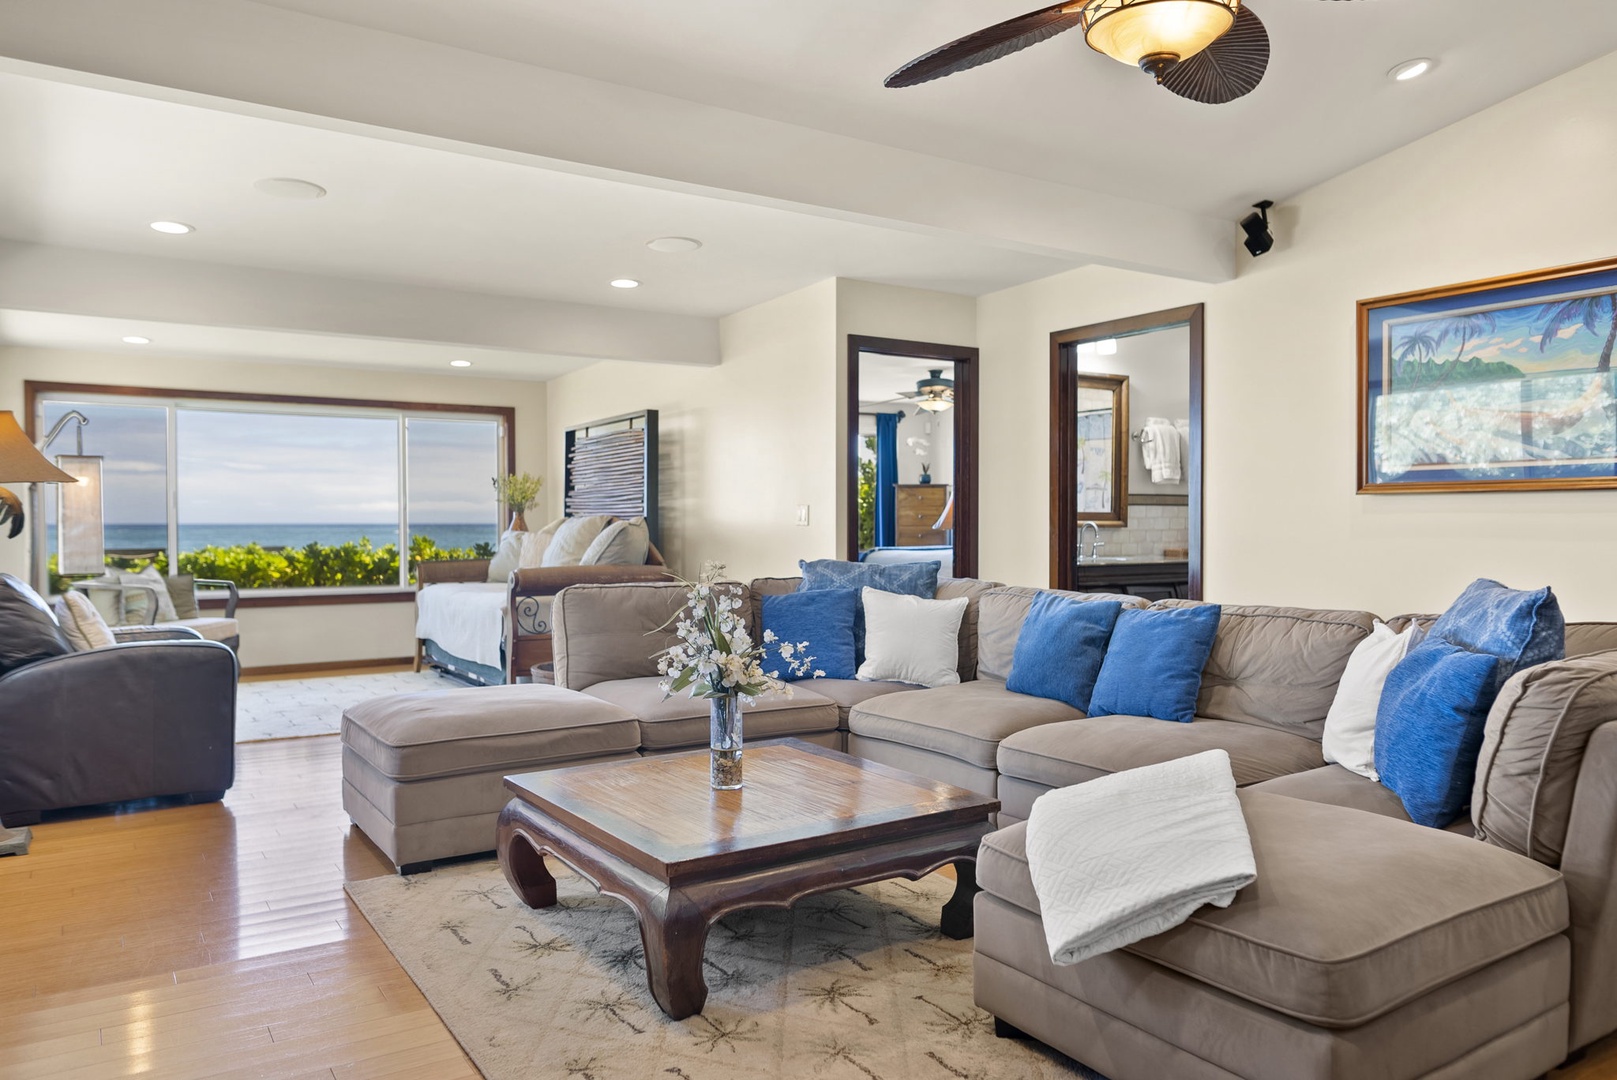 Waialua Vacation Rentals, Hale Oka Nunu - Check out the ocean views from the comfort of the living room